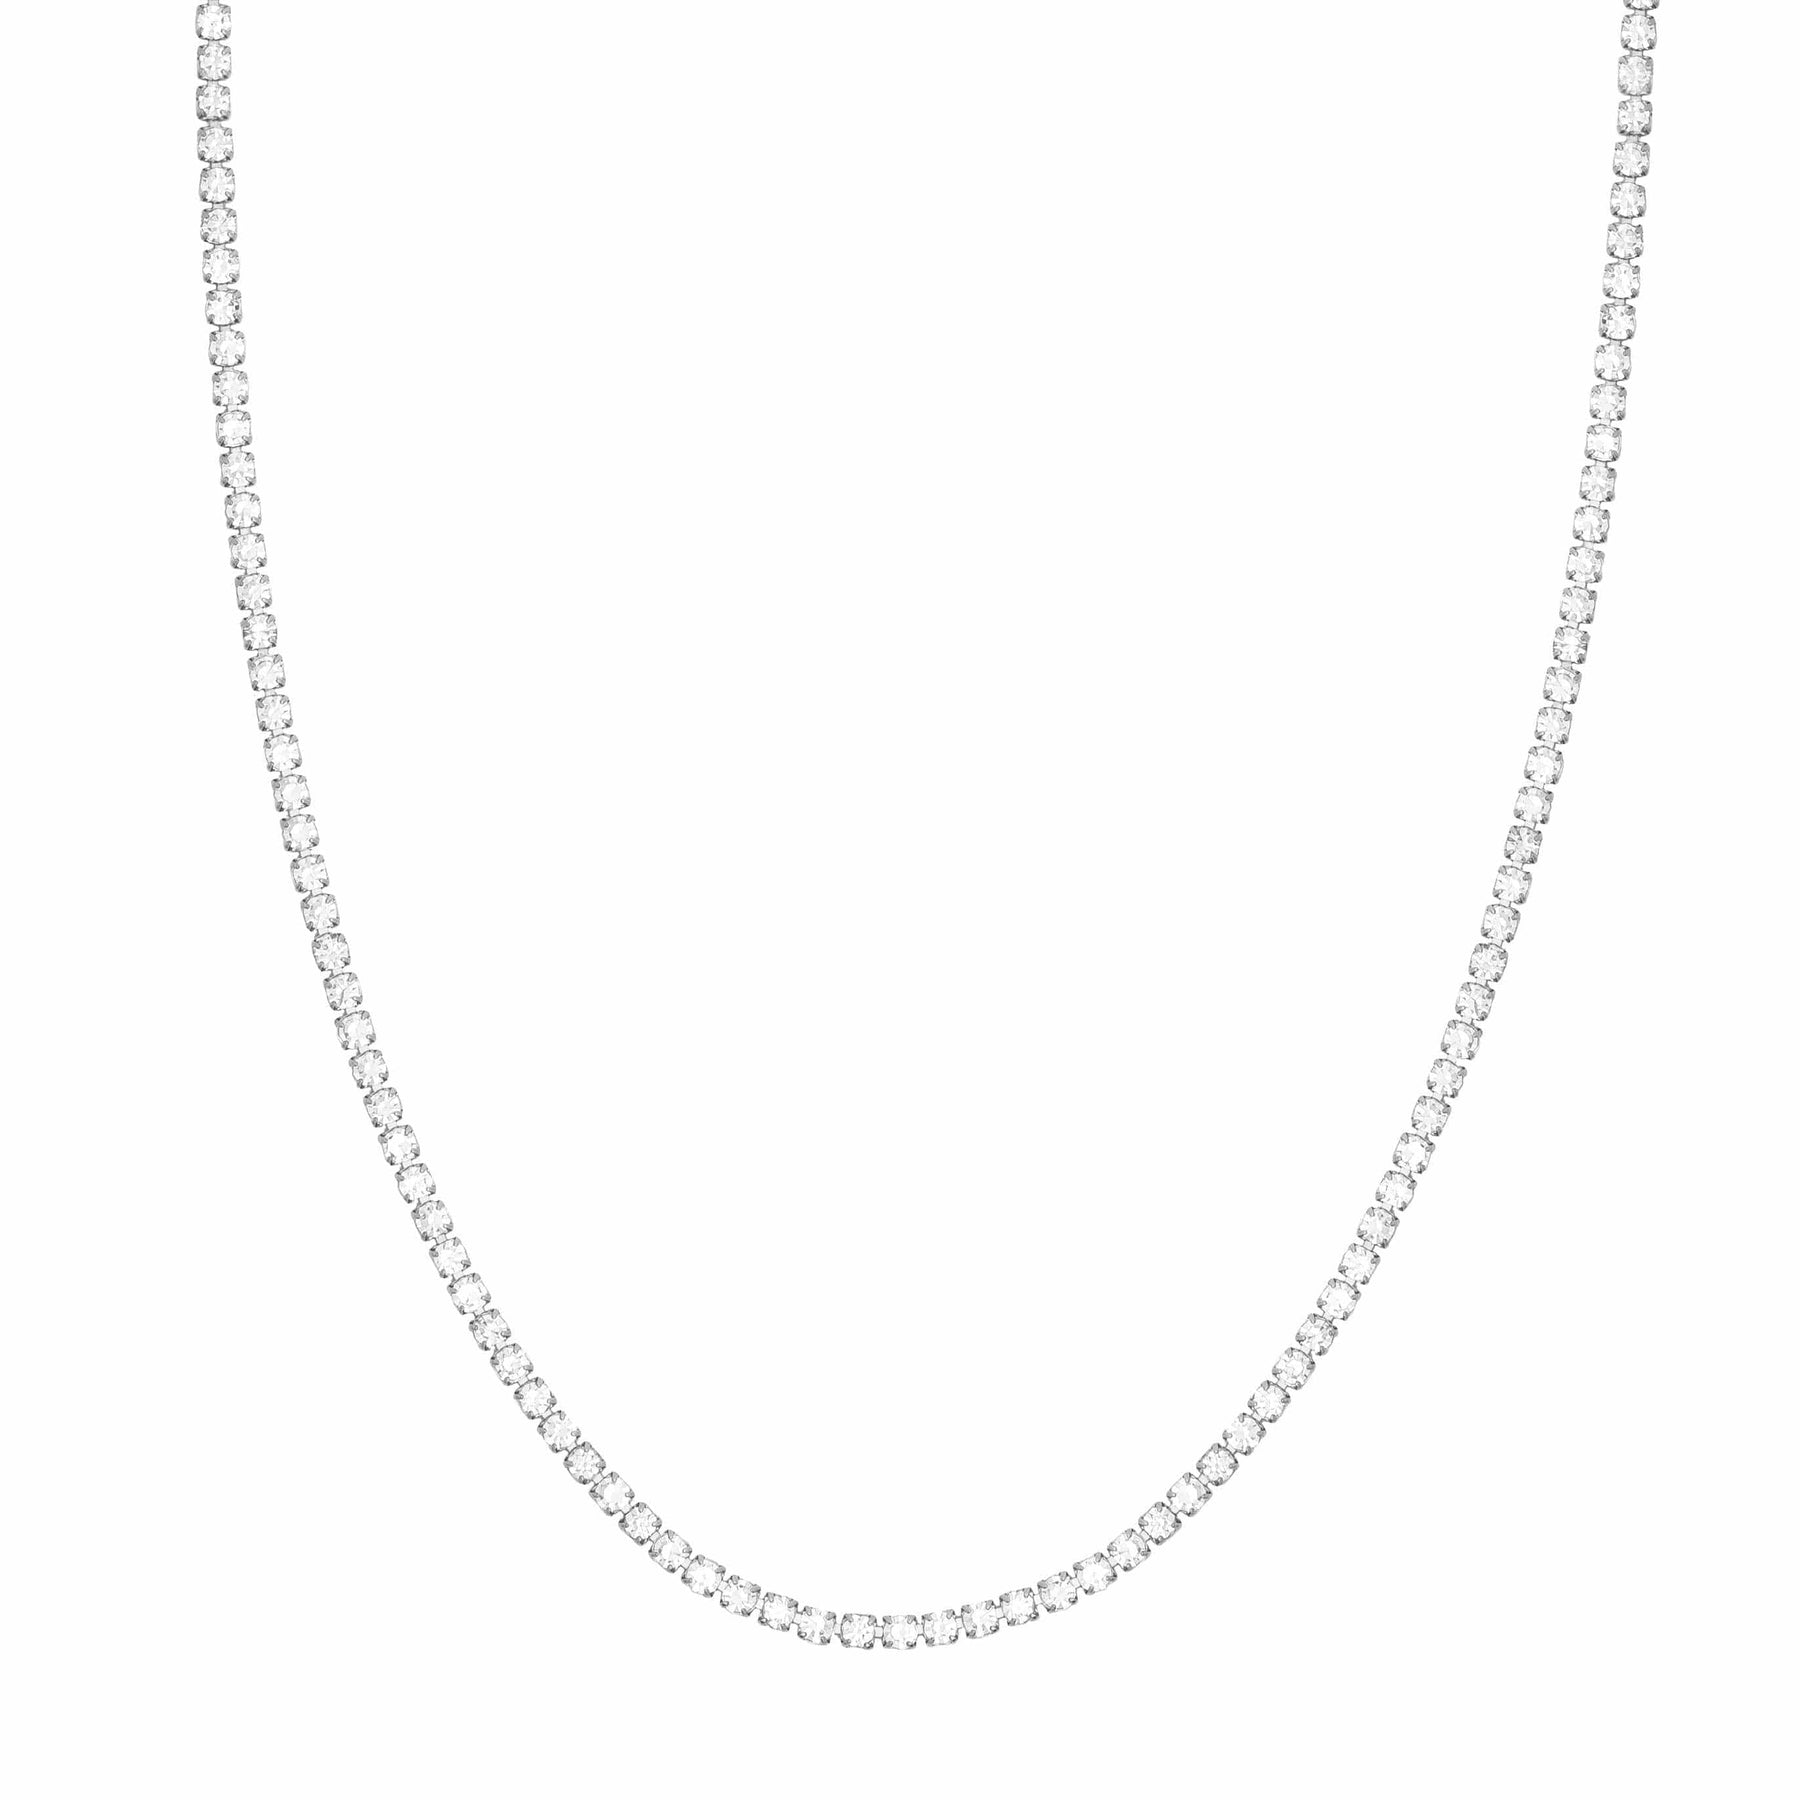 BohoMoon Stainless Steel Bardot Tennis Necklace Silver